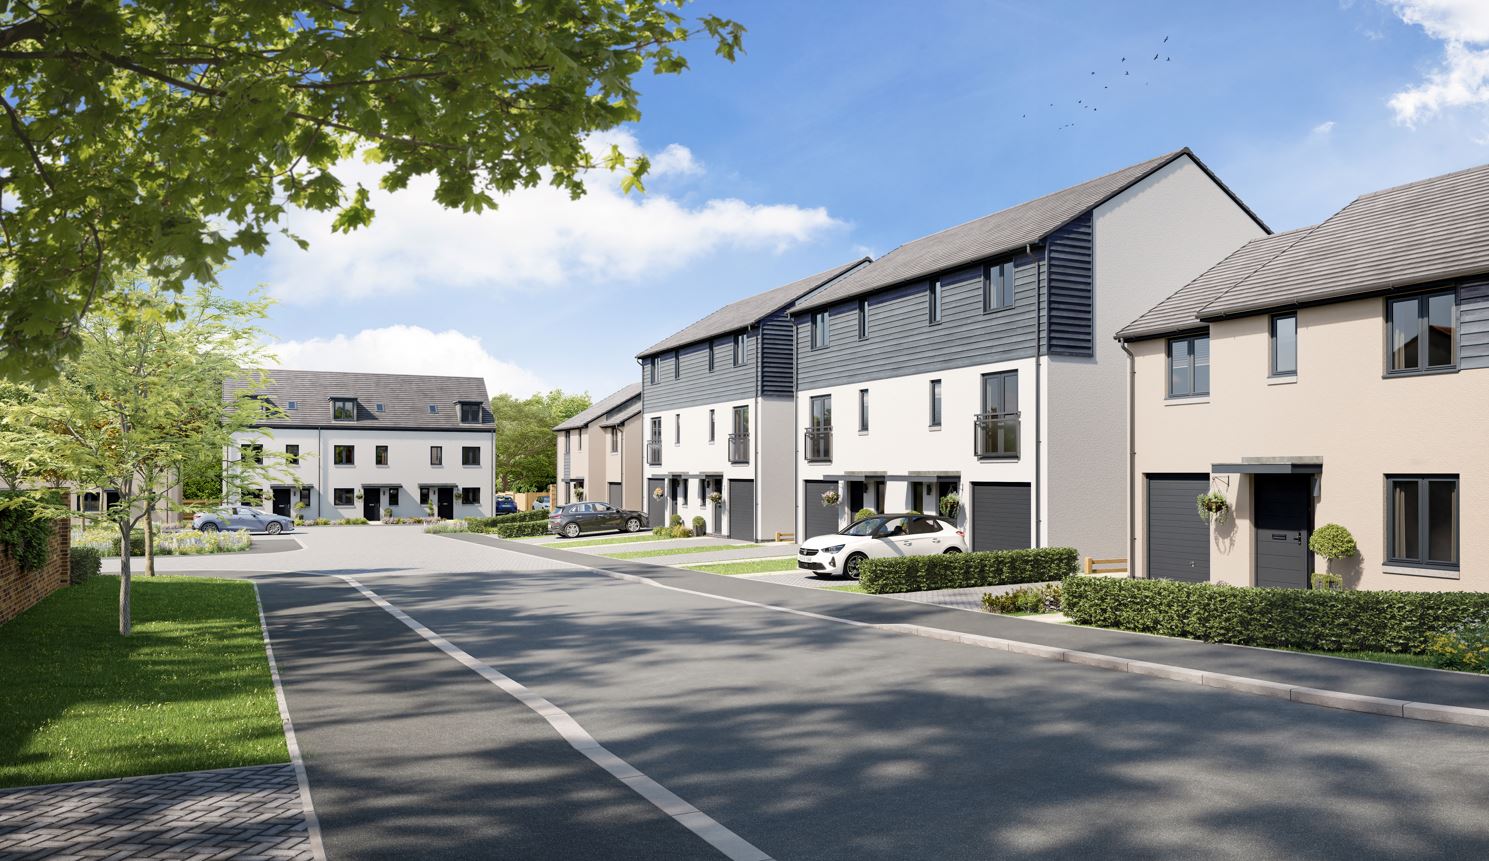 Dandara signs up JR Scaffold Services to help deliver Shawfair affordable homes